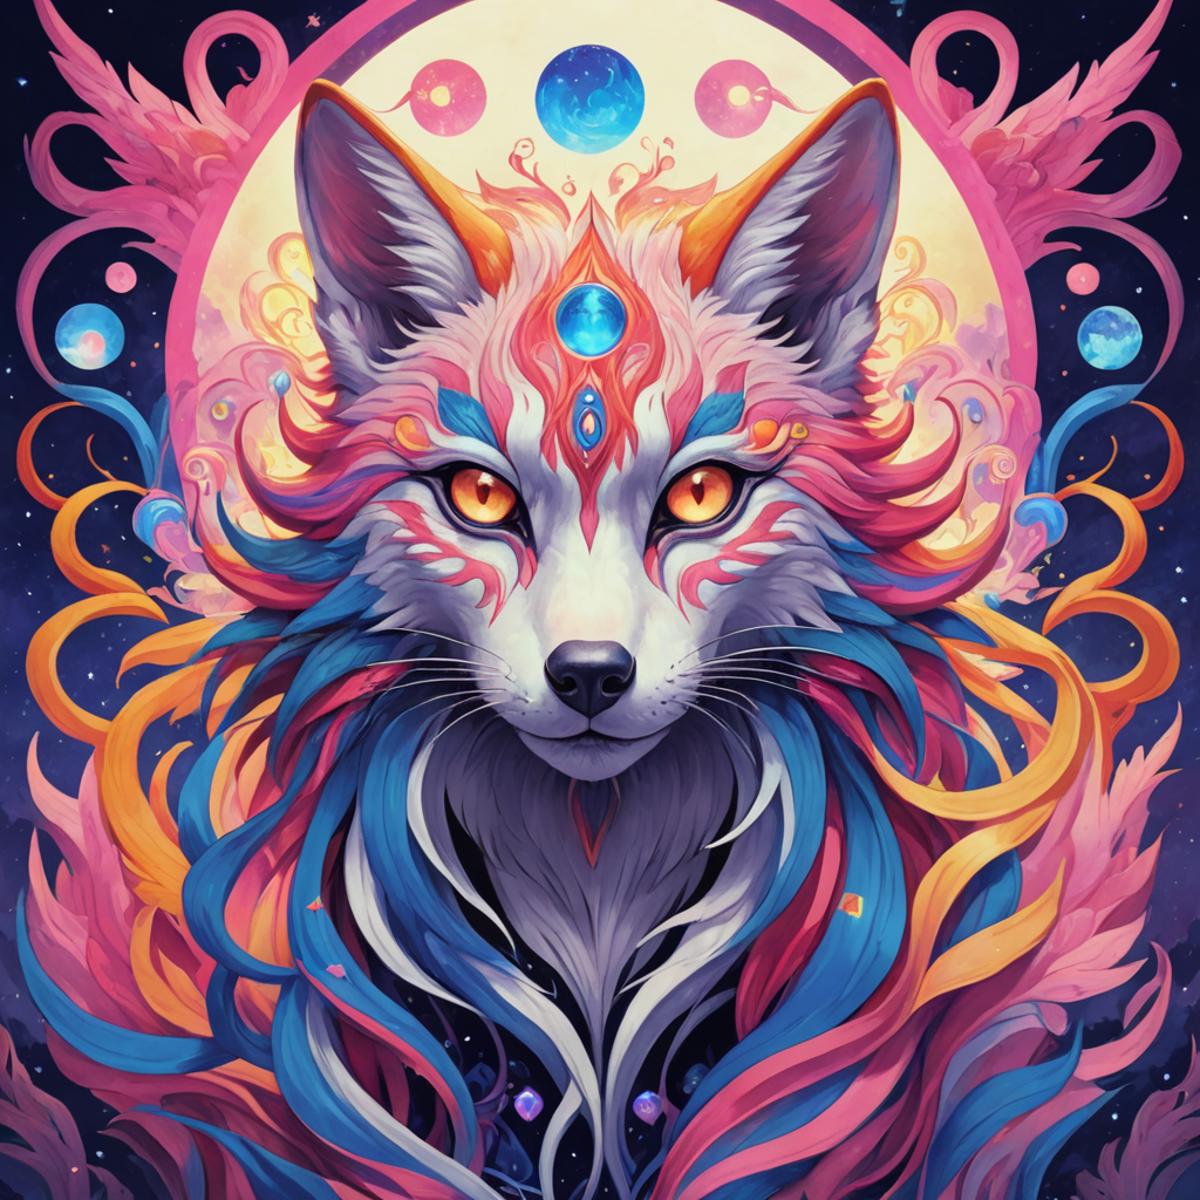 An artistic illustration of a fox with a blue and pink mane and a moon in the background.